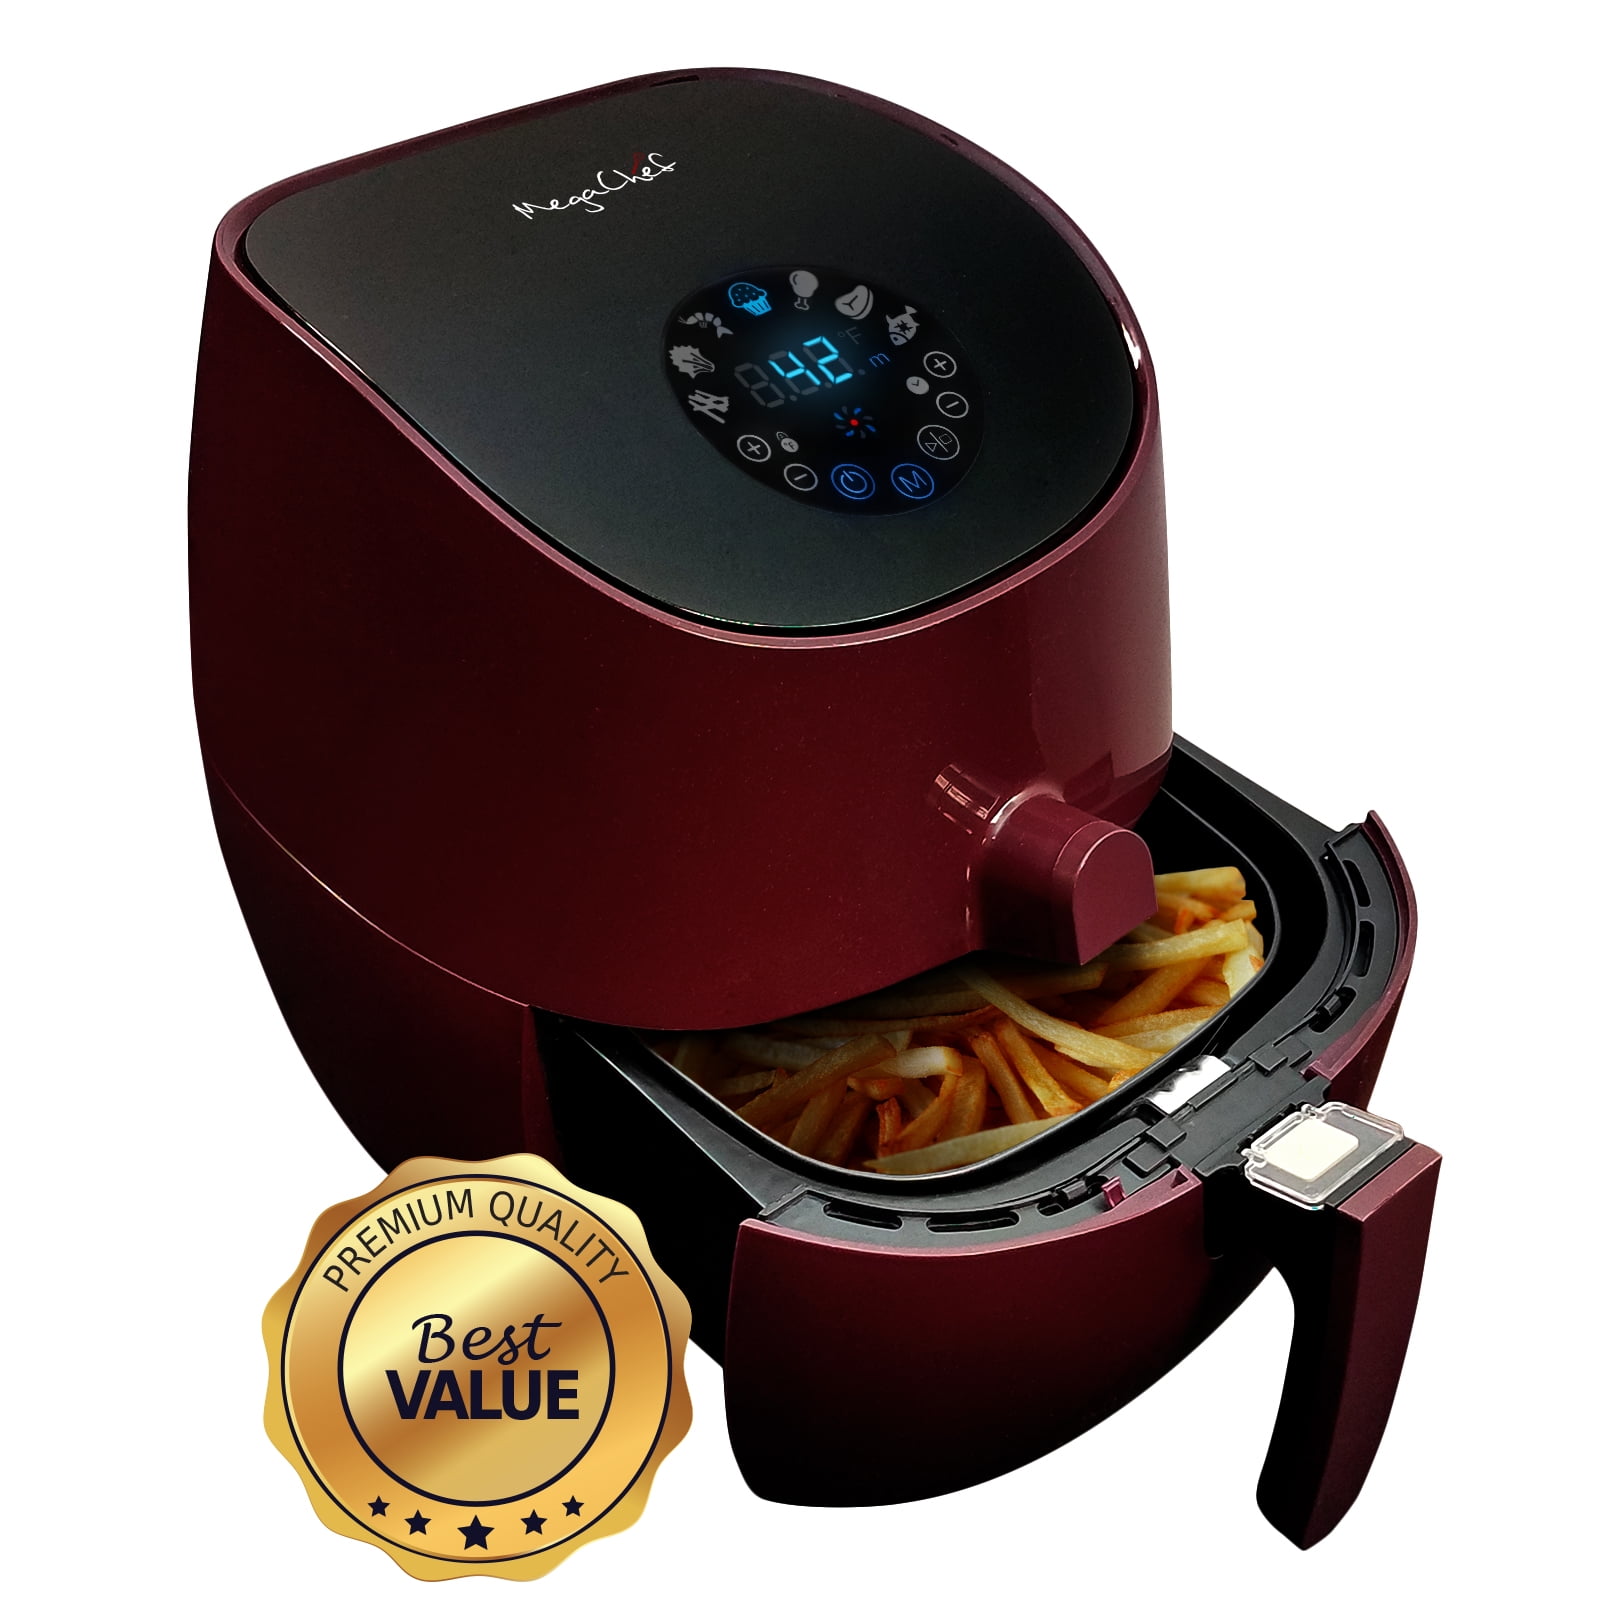 HUGE PRICE DROP ON THIS MUST HAVE KITCHEN APPLIANCE 😱😱🔥 GET THIS POWERXL GRILL  AIR FRYER COMBO FOR ONLY $69 retail is $189 😳😳 as the name…